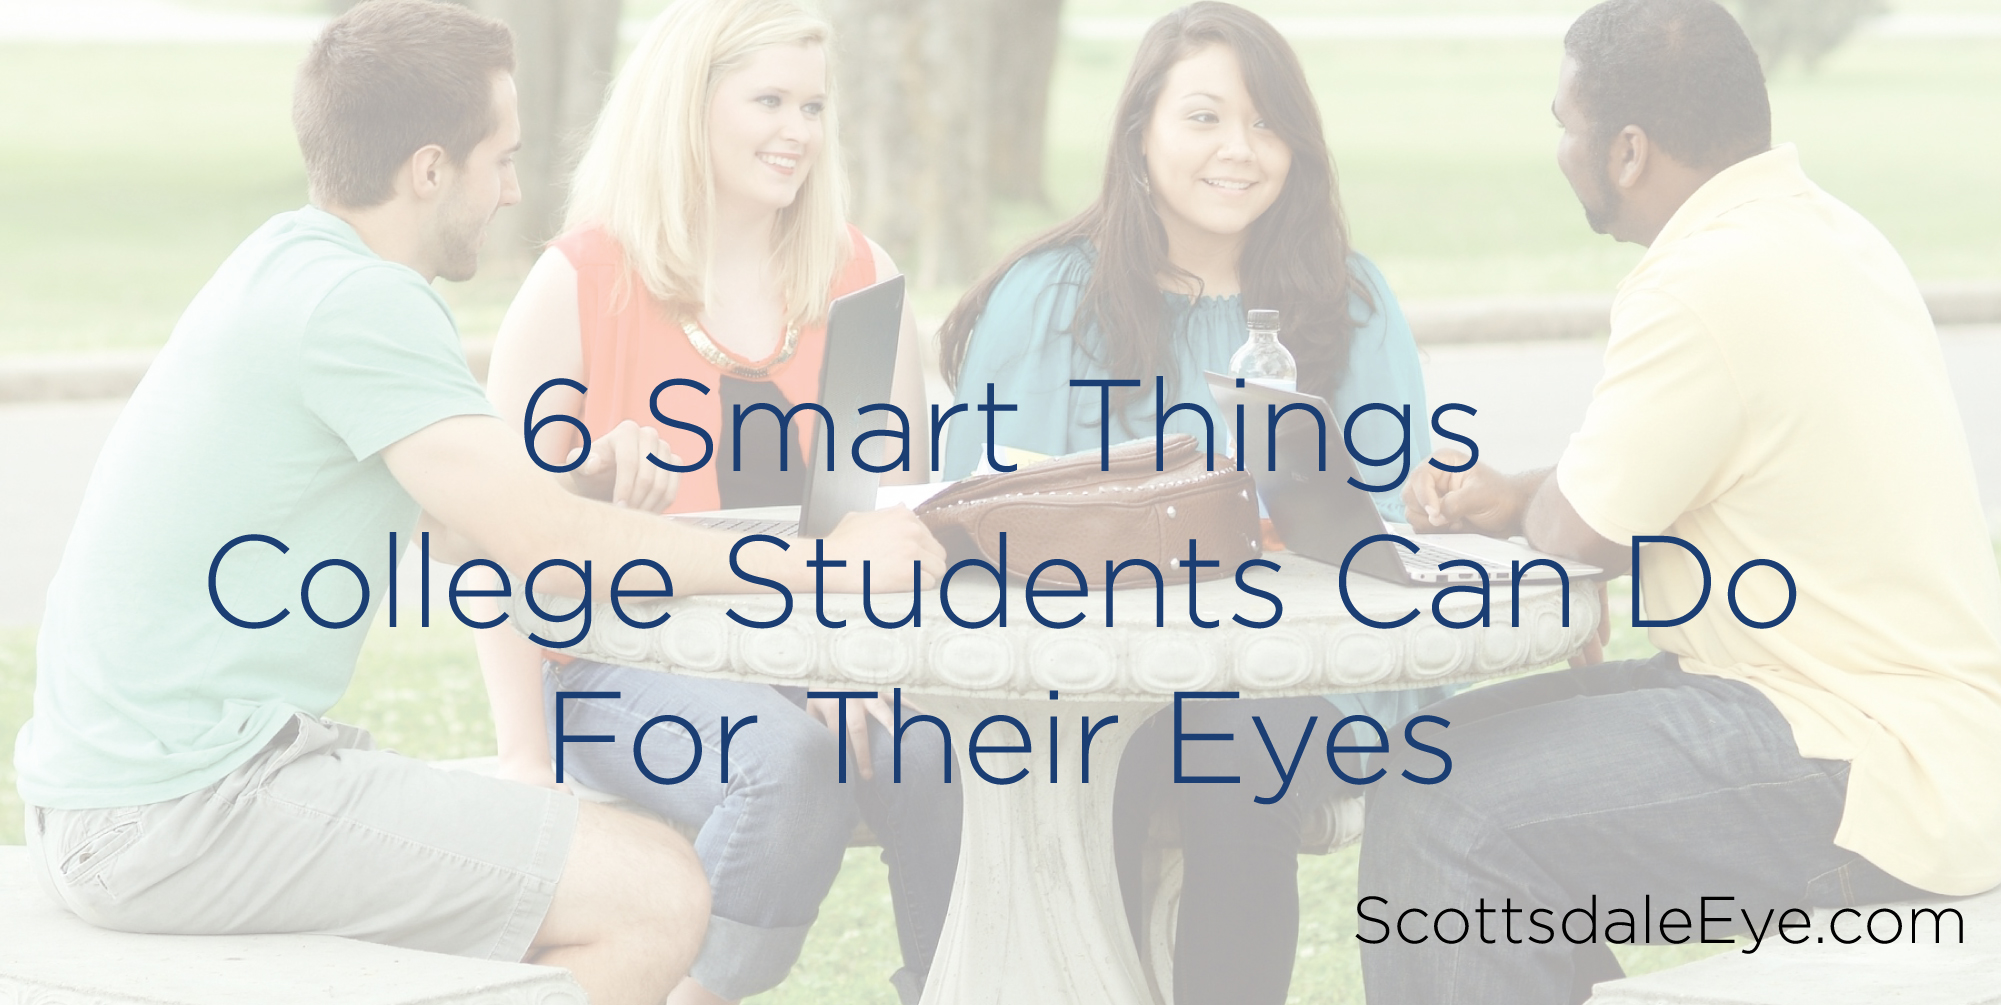 6 Smart Things College Students Can Do For Their Eyes